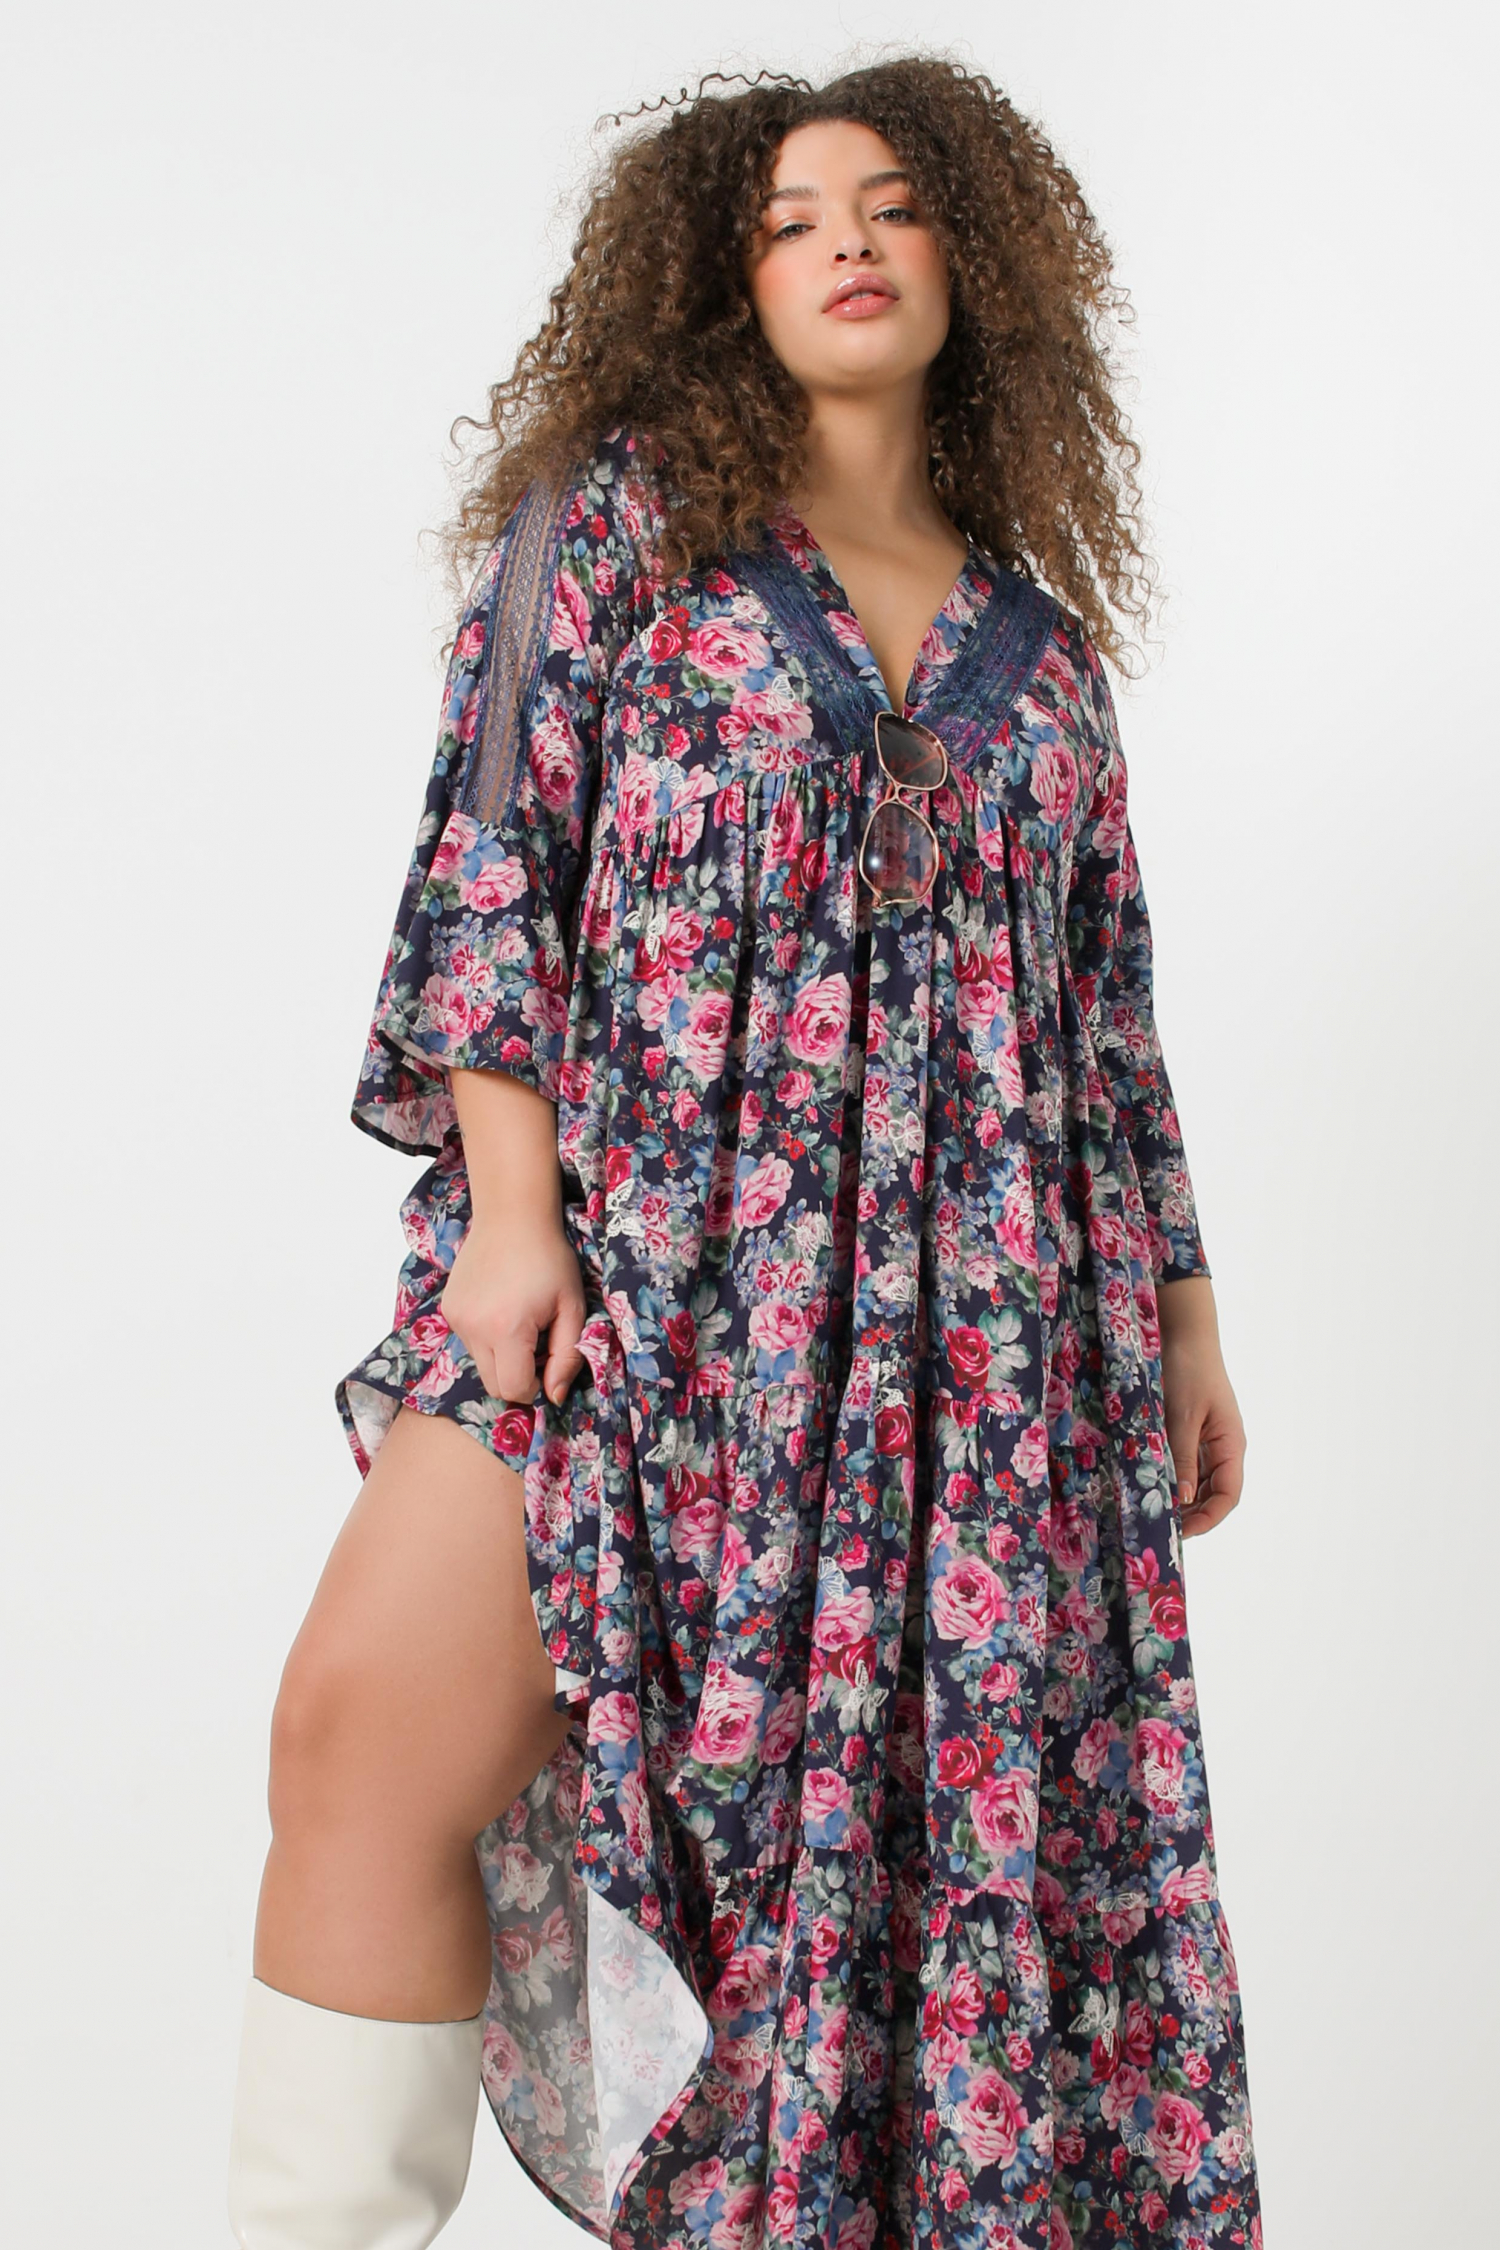 Bohemian-style floral print dress (shipping February 10/15)